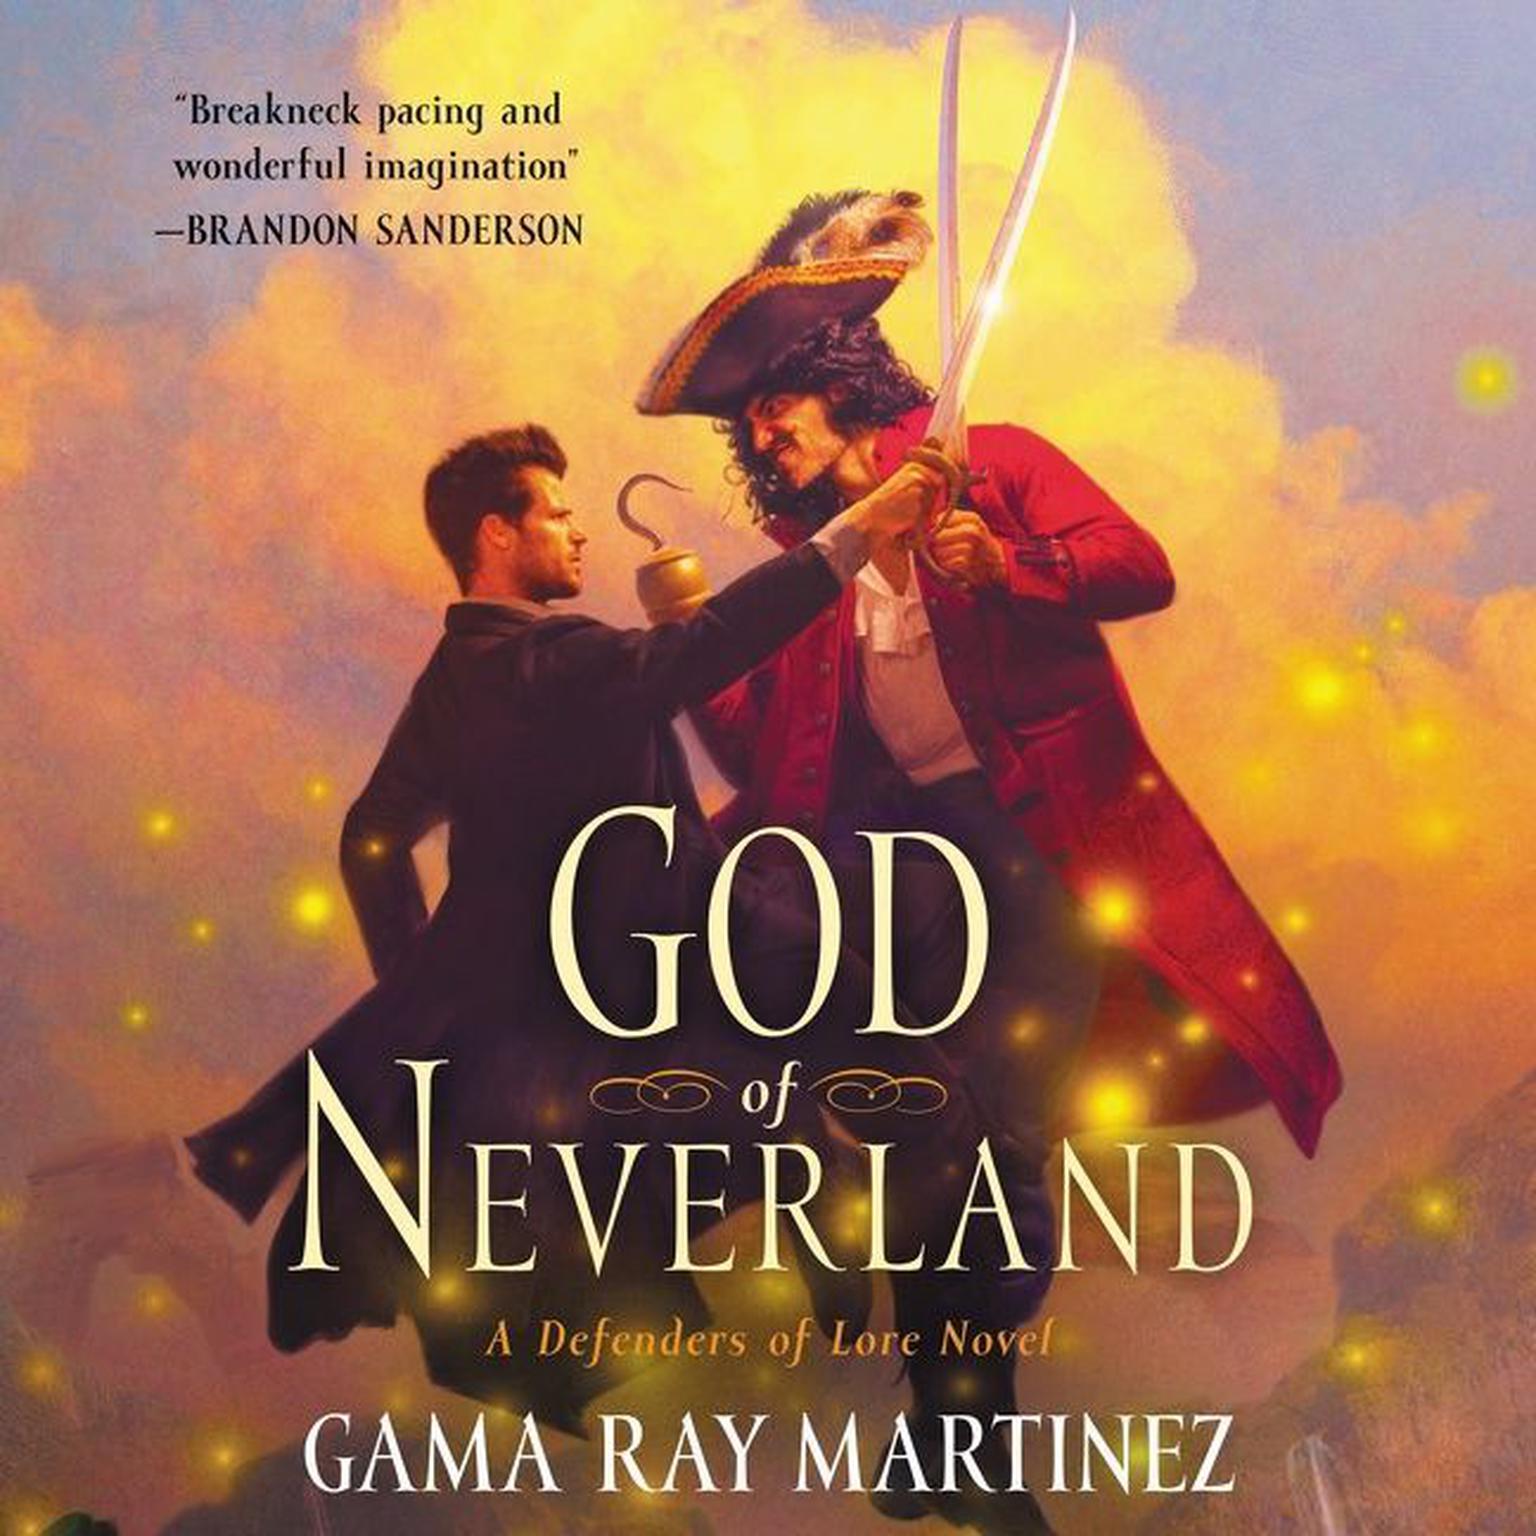 God of Neverland: A Defenders of Lore Novel Audiobook, by Gama Ray Martinez